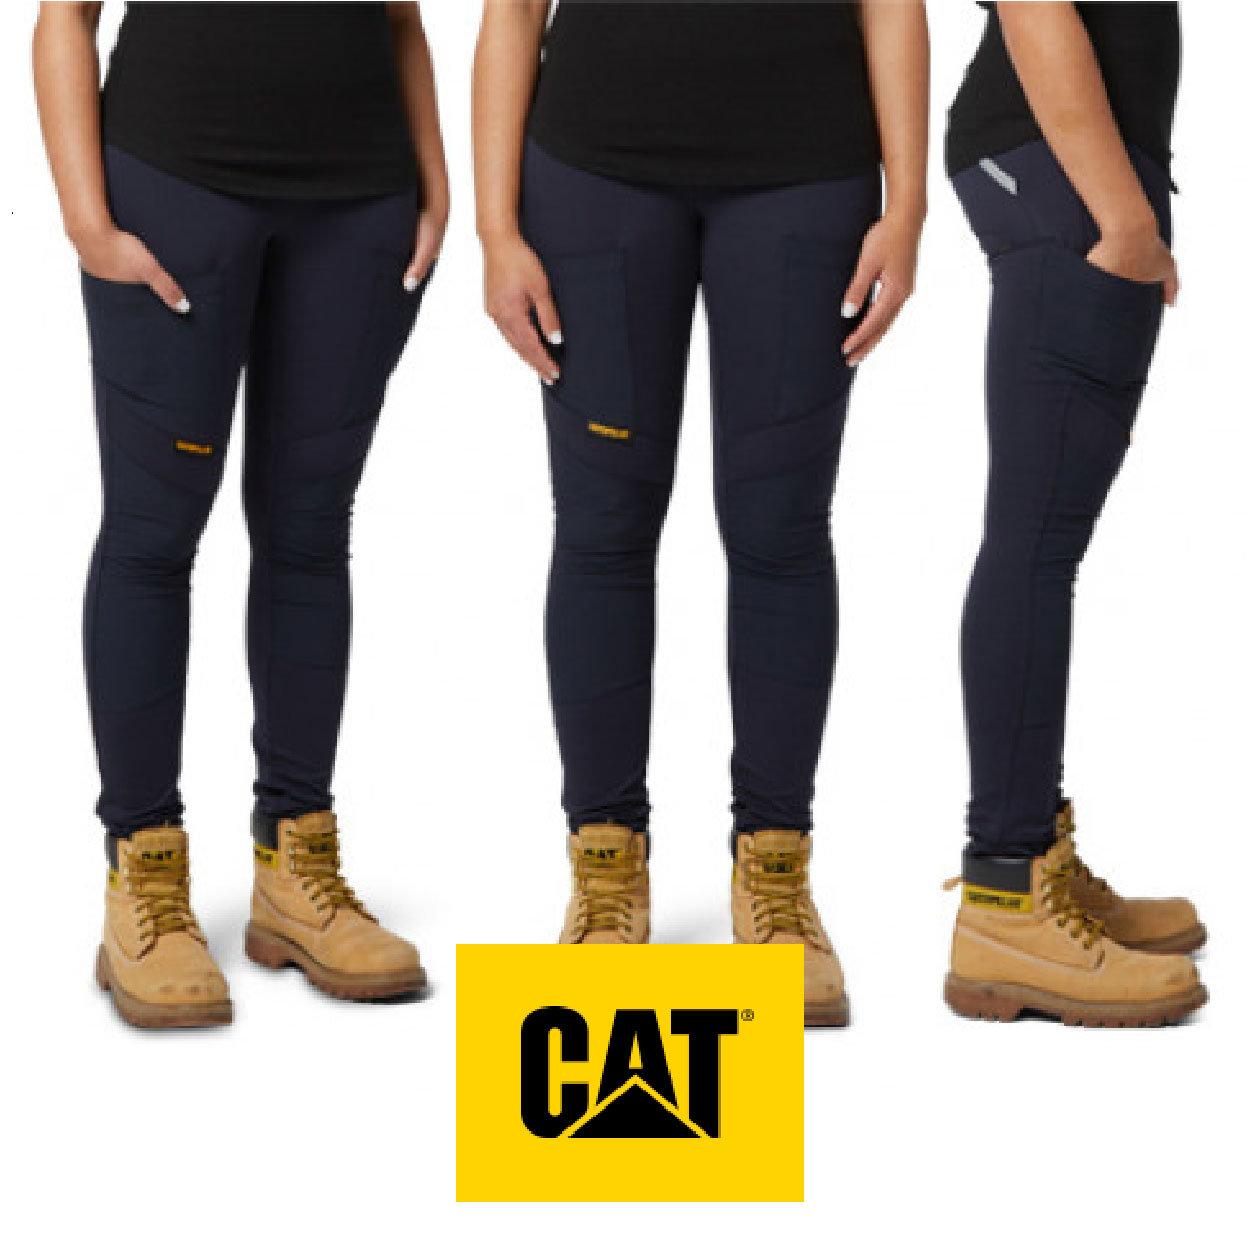 Cat Women's Taped Leggings 1810096 - Unique Workwear and Safety Equipment